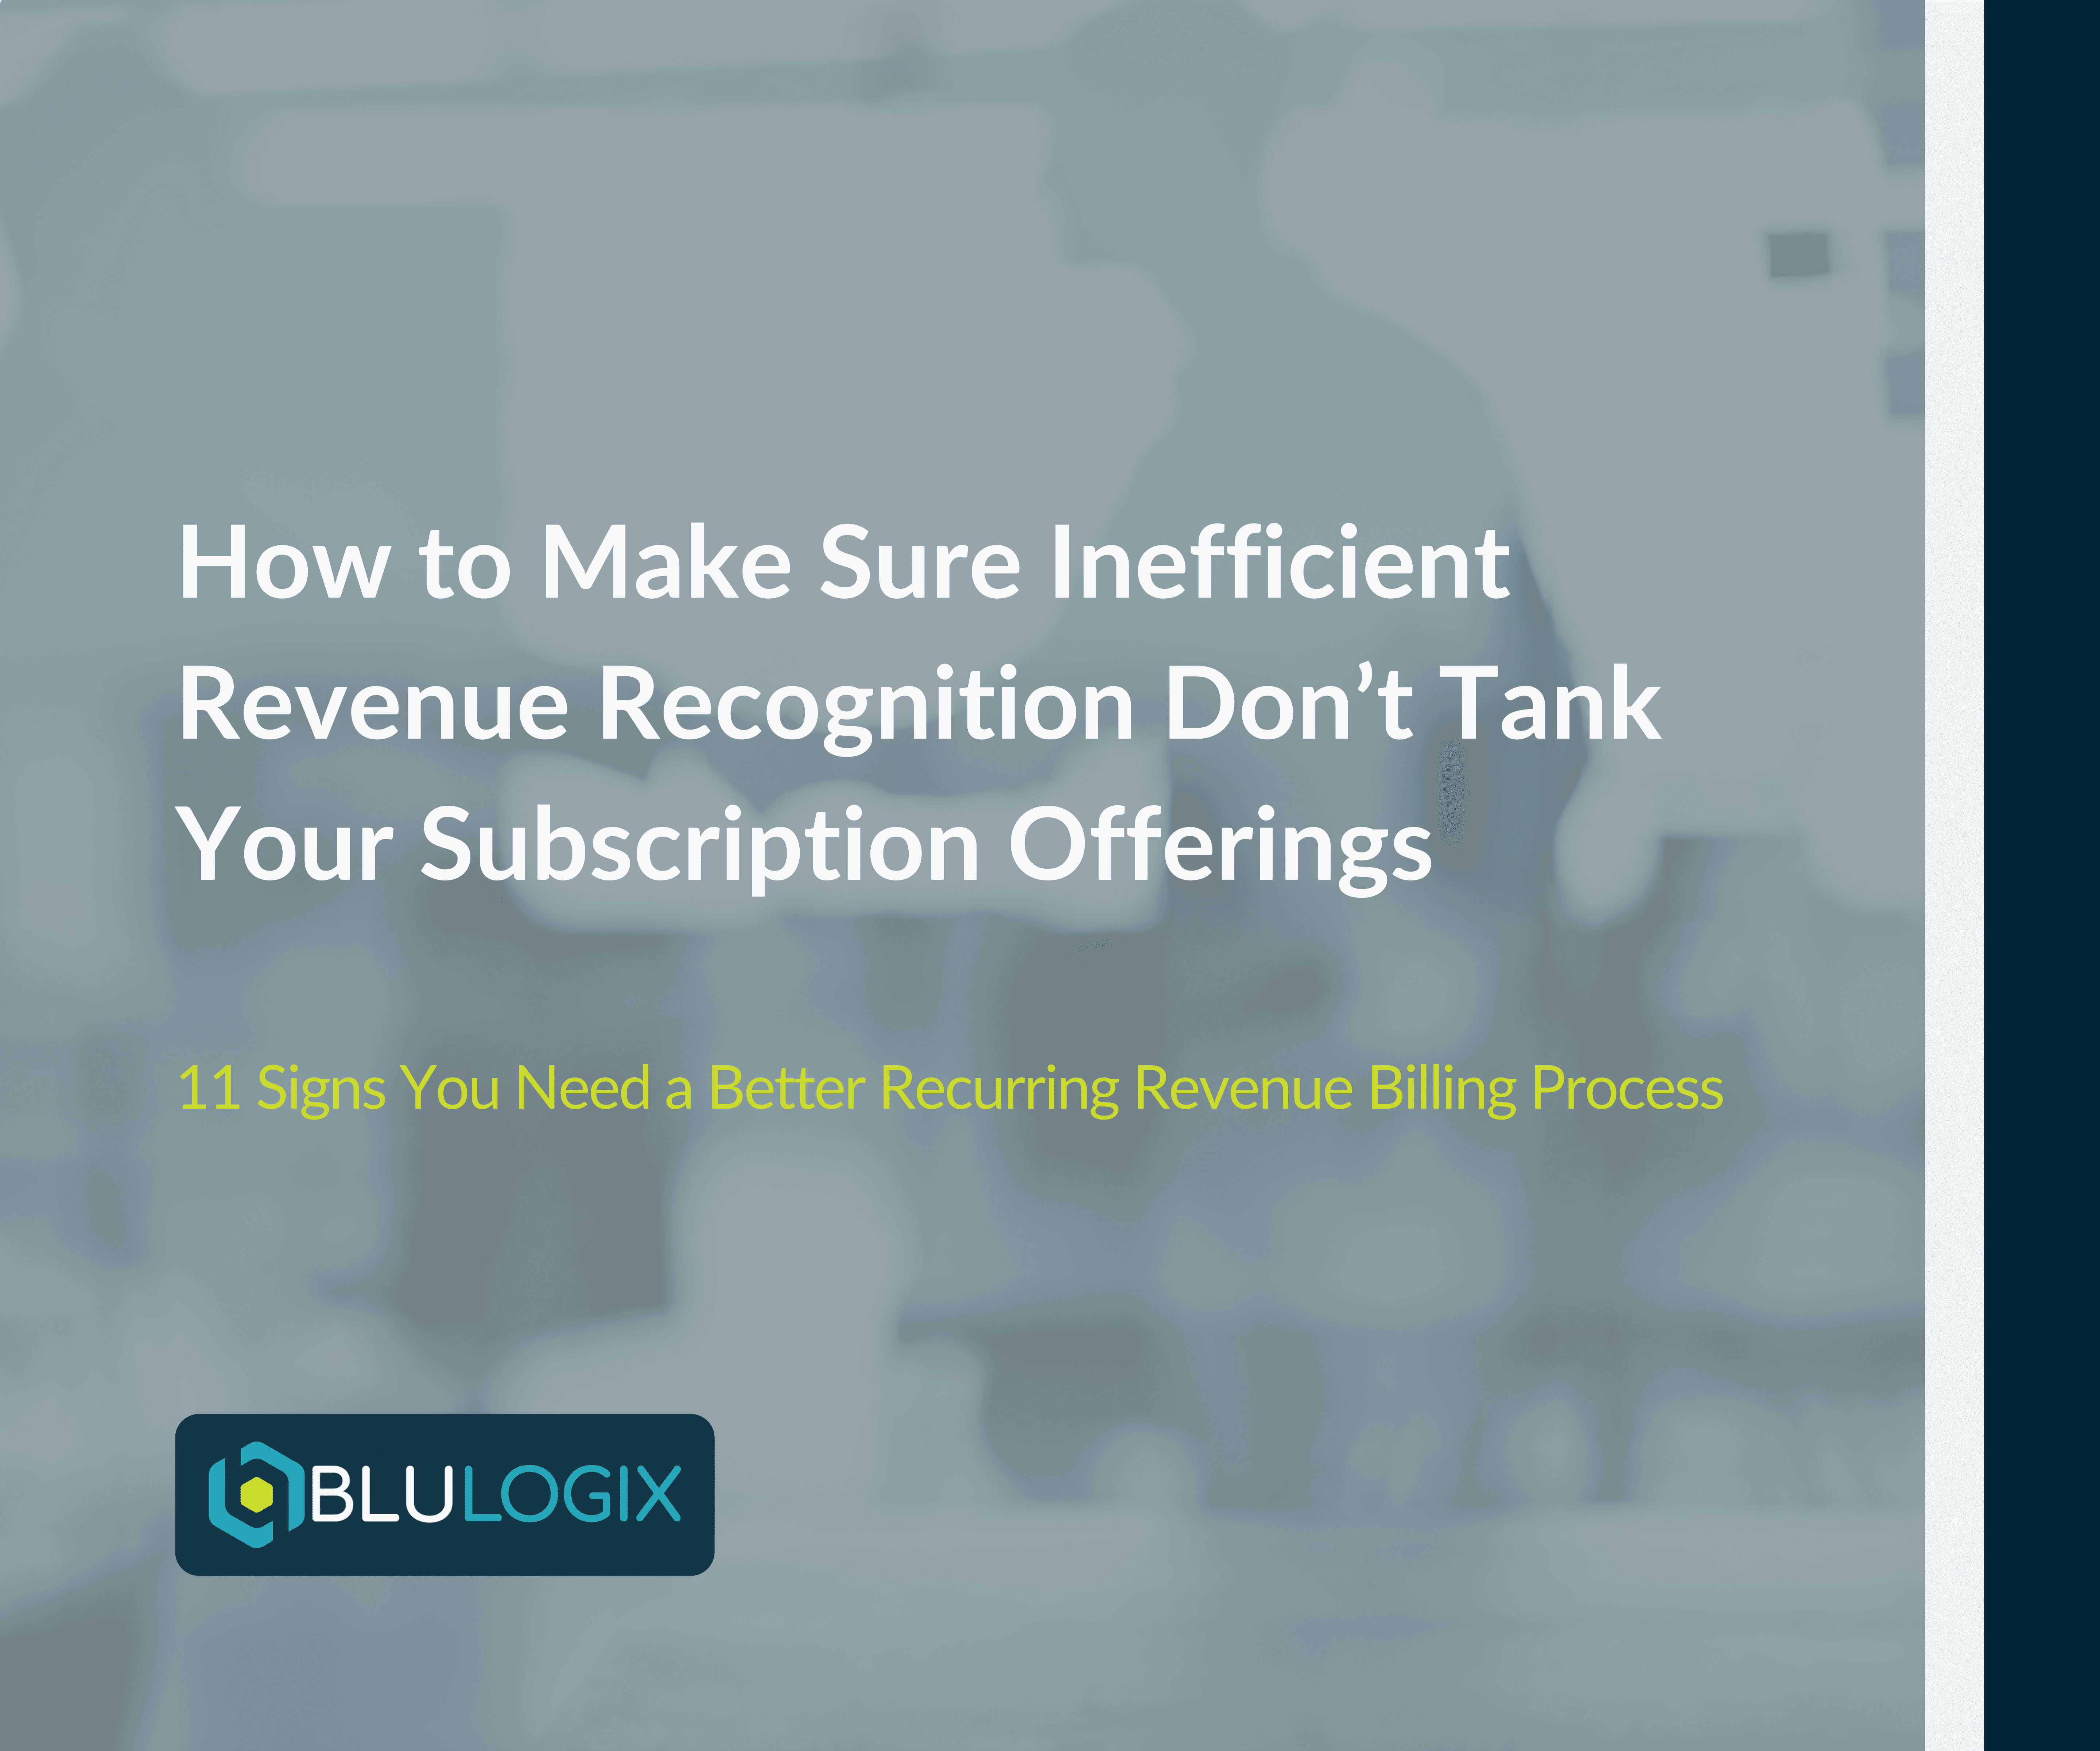 How to Make Sure Inefficient Revenue Recognition Don’t Tank Your Subscription Offerings